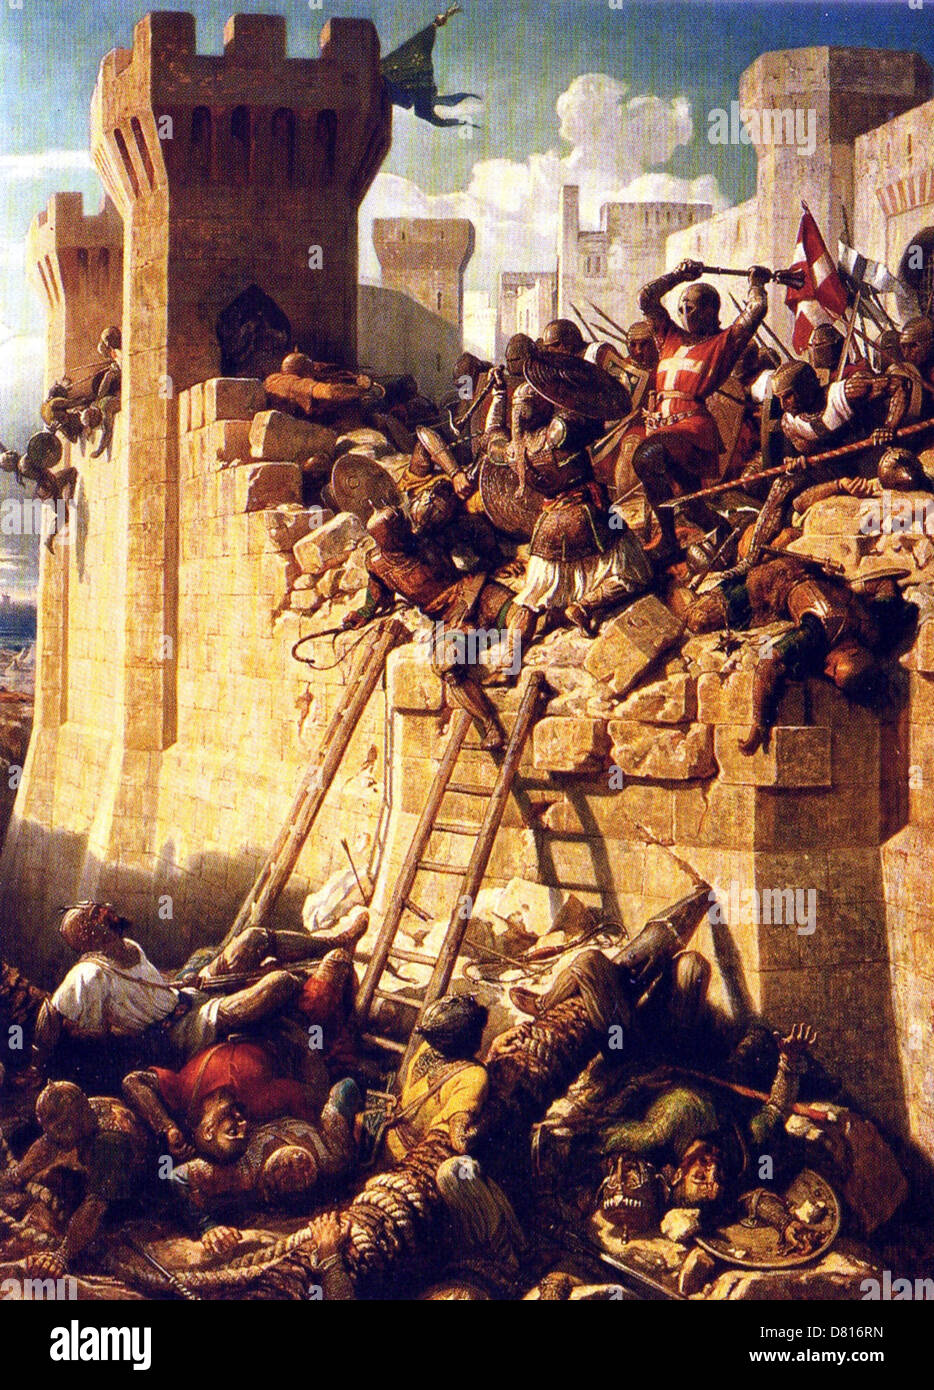 The Siege of Acre. The Hospitalier Master Mathieu de Clermont defending the walls in 1291 Stock Photo